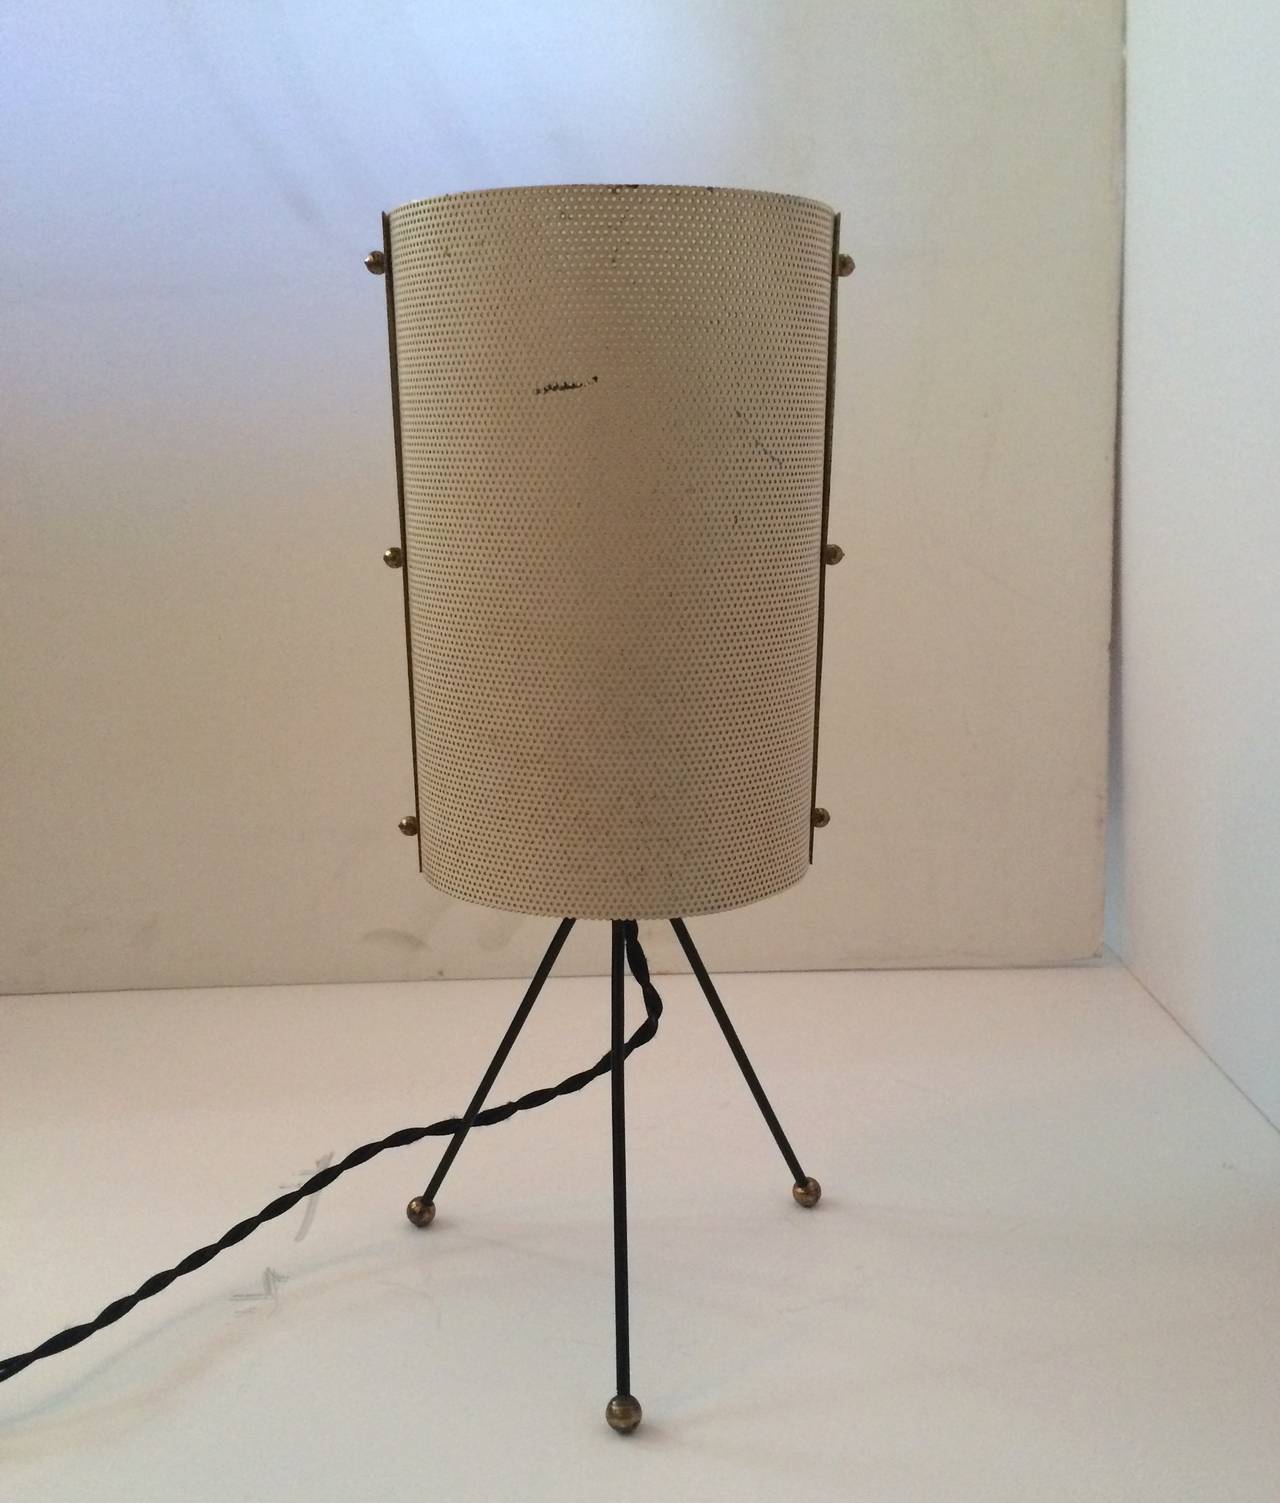 Table Lamp (In the style of Mathieu Mategot)
Circa 1950s
Tripod metal base, brass ball feet, perforated, cylindrical metal shade
Excellent original condition, new electrical wire and plug